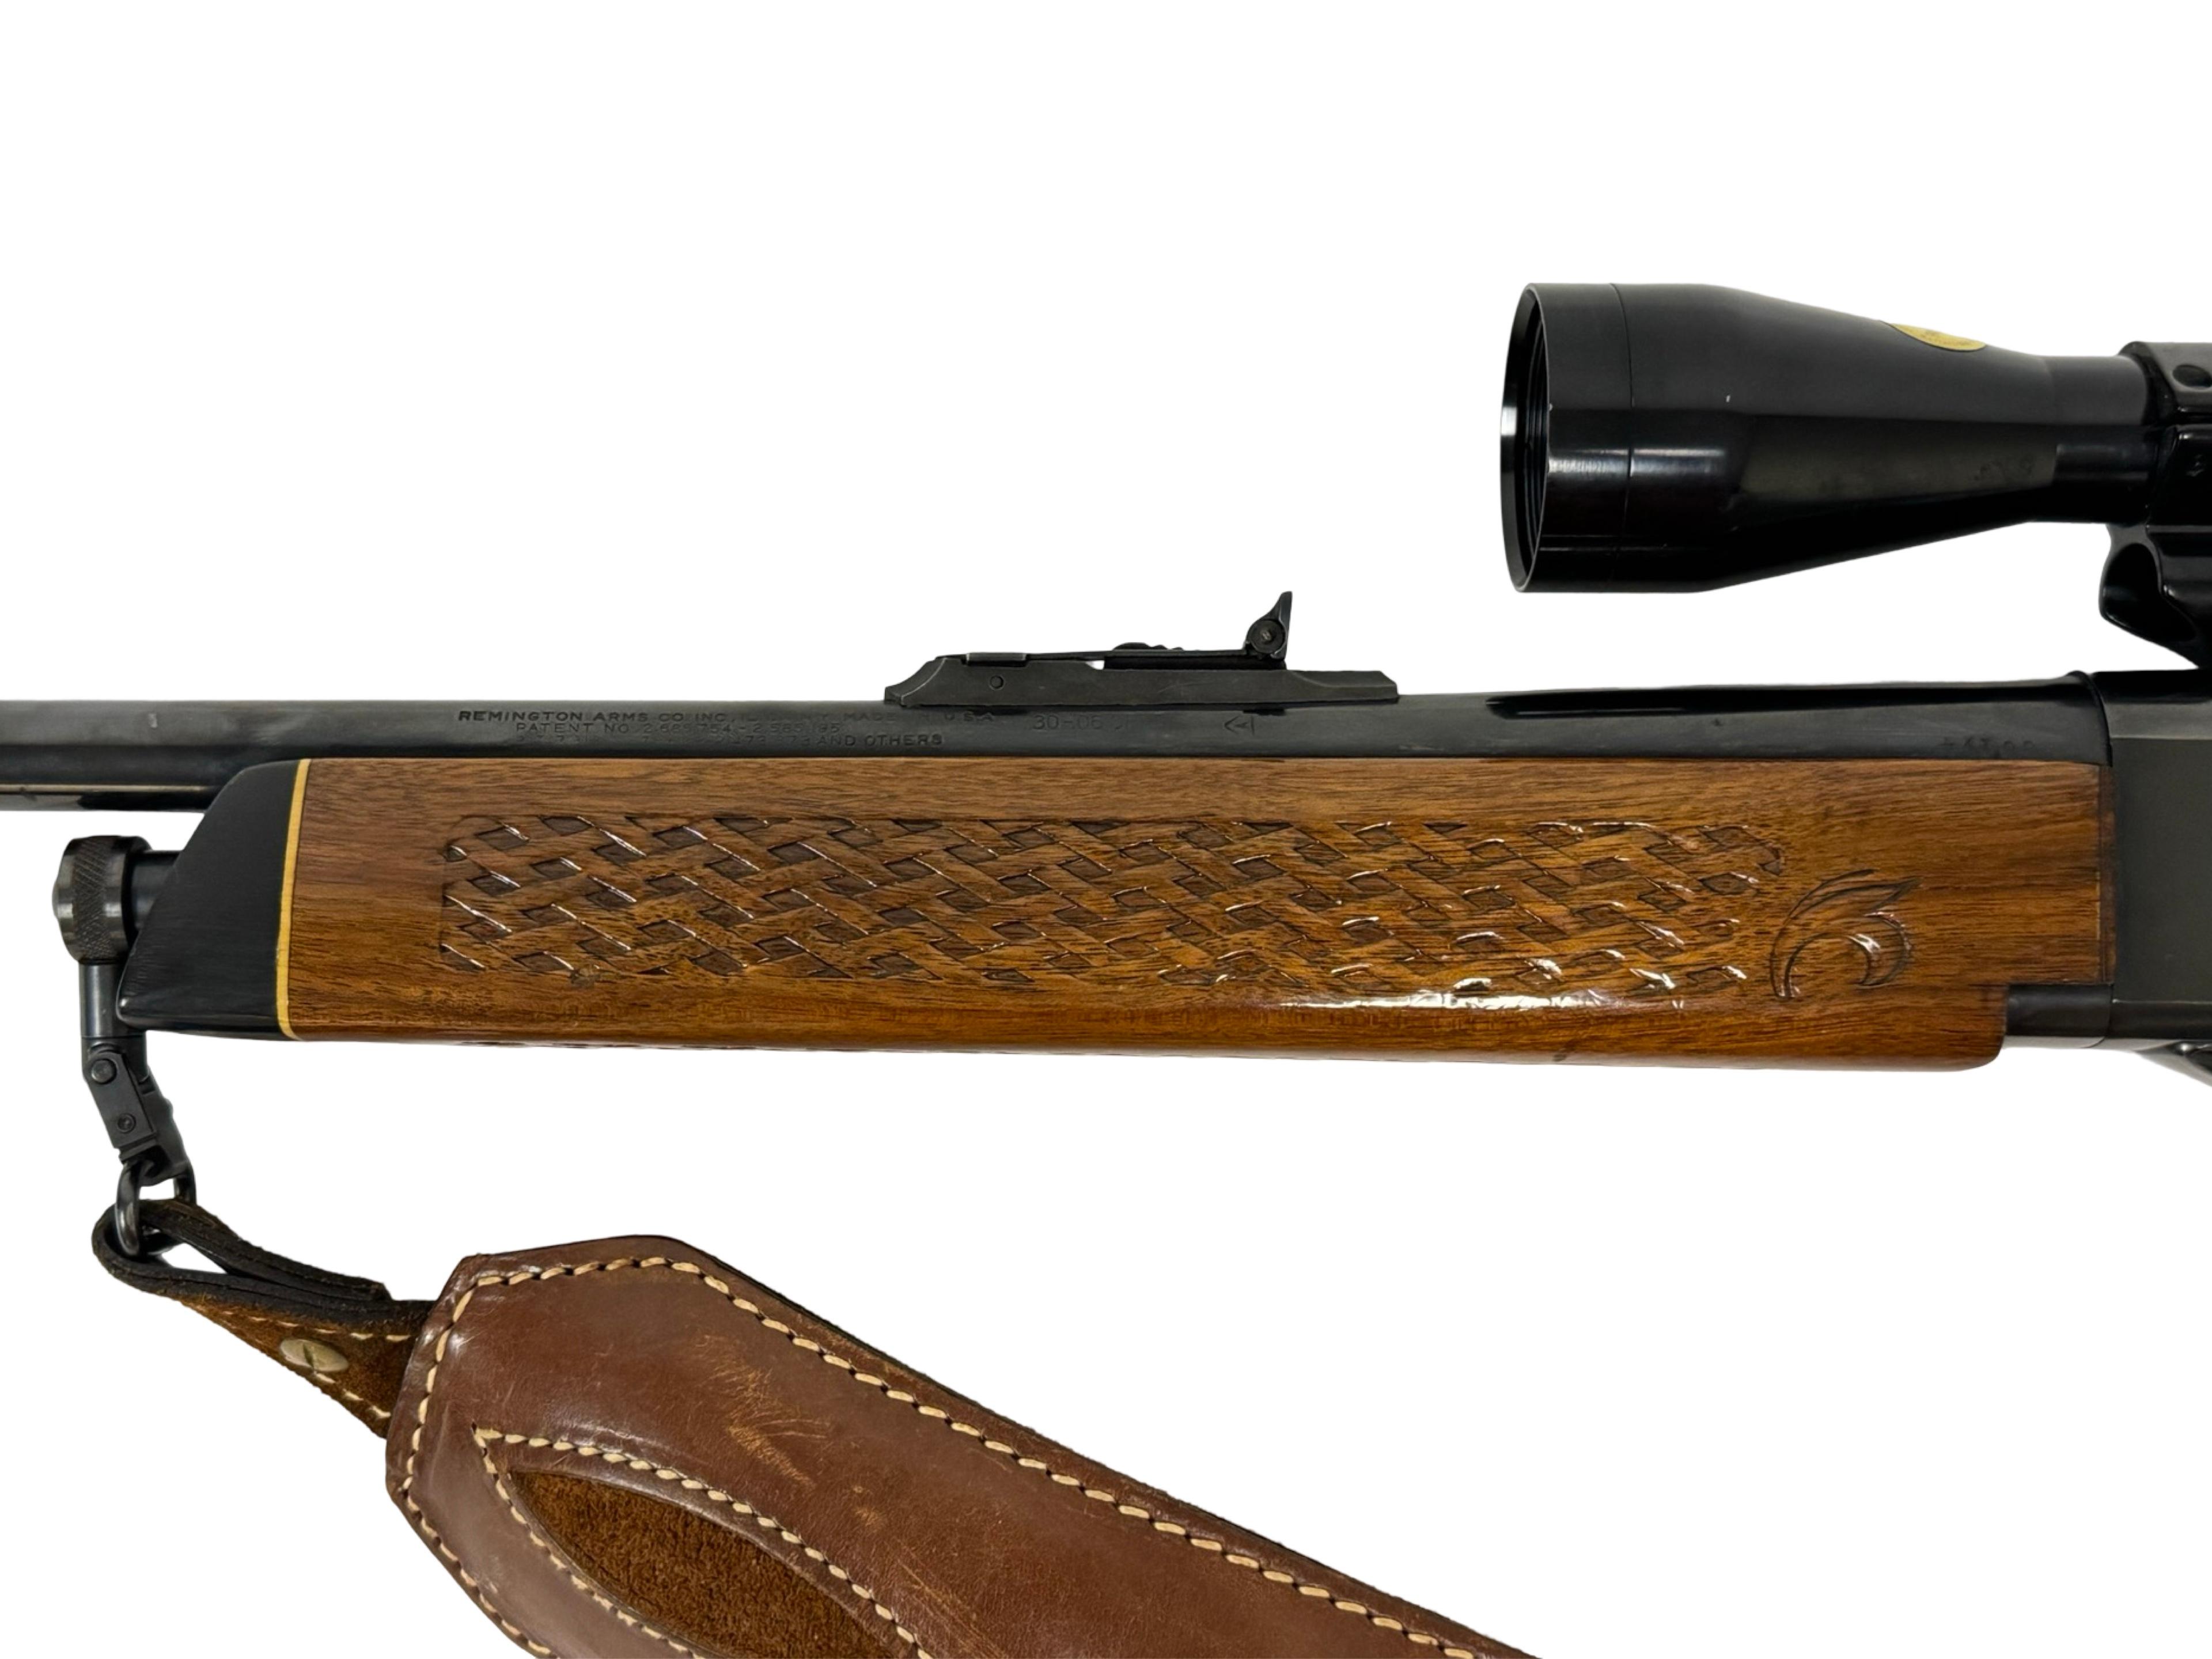 Excellent 1970 Woodsmaster Model 742 BDL Deluxe Semi-Automatic .30-06 SPRG Magazine Rifle with Scope